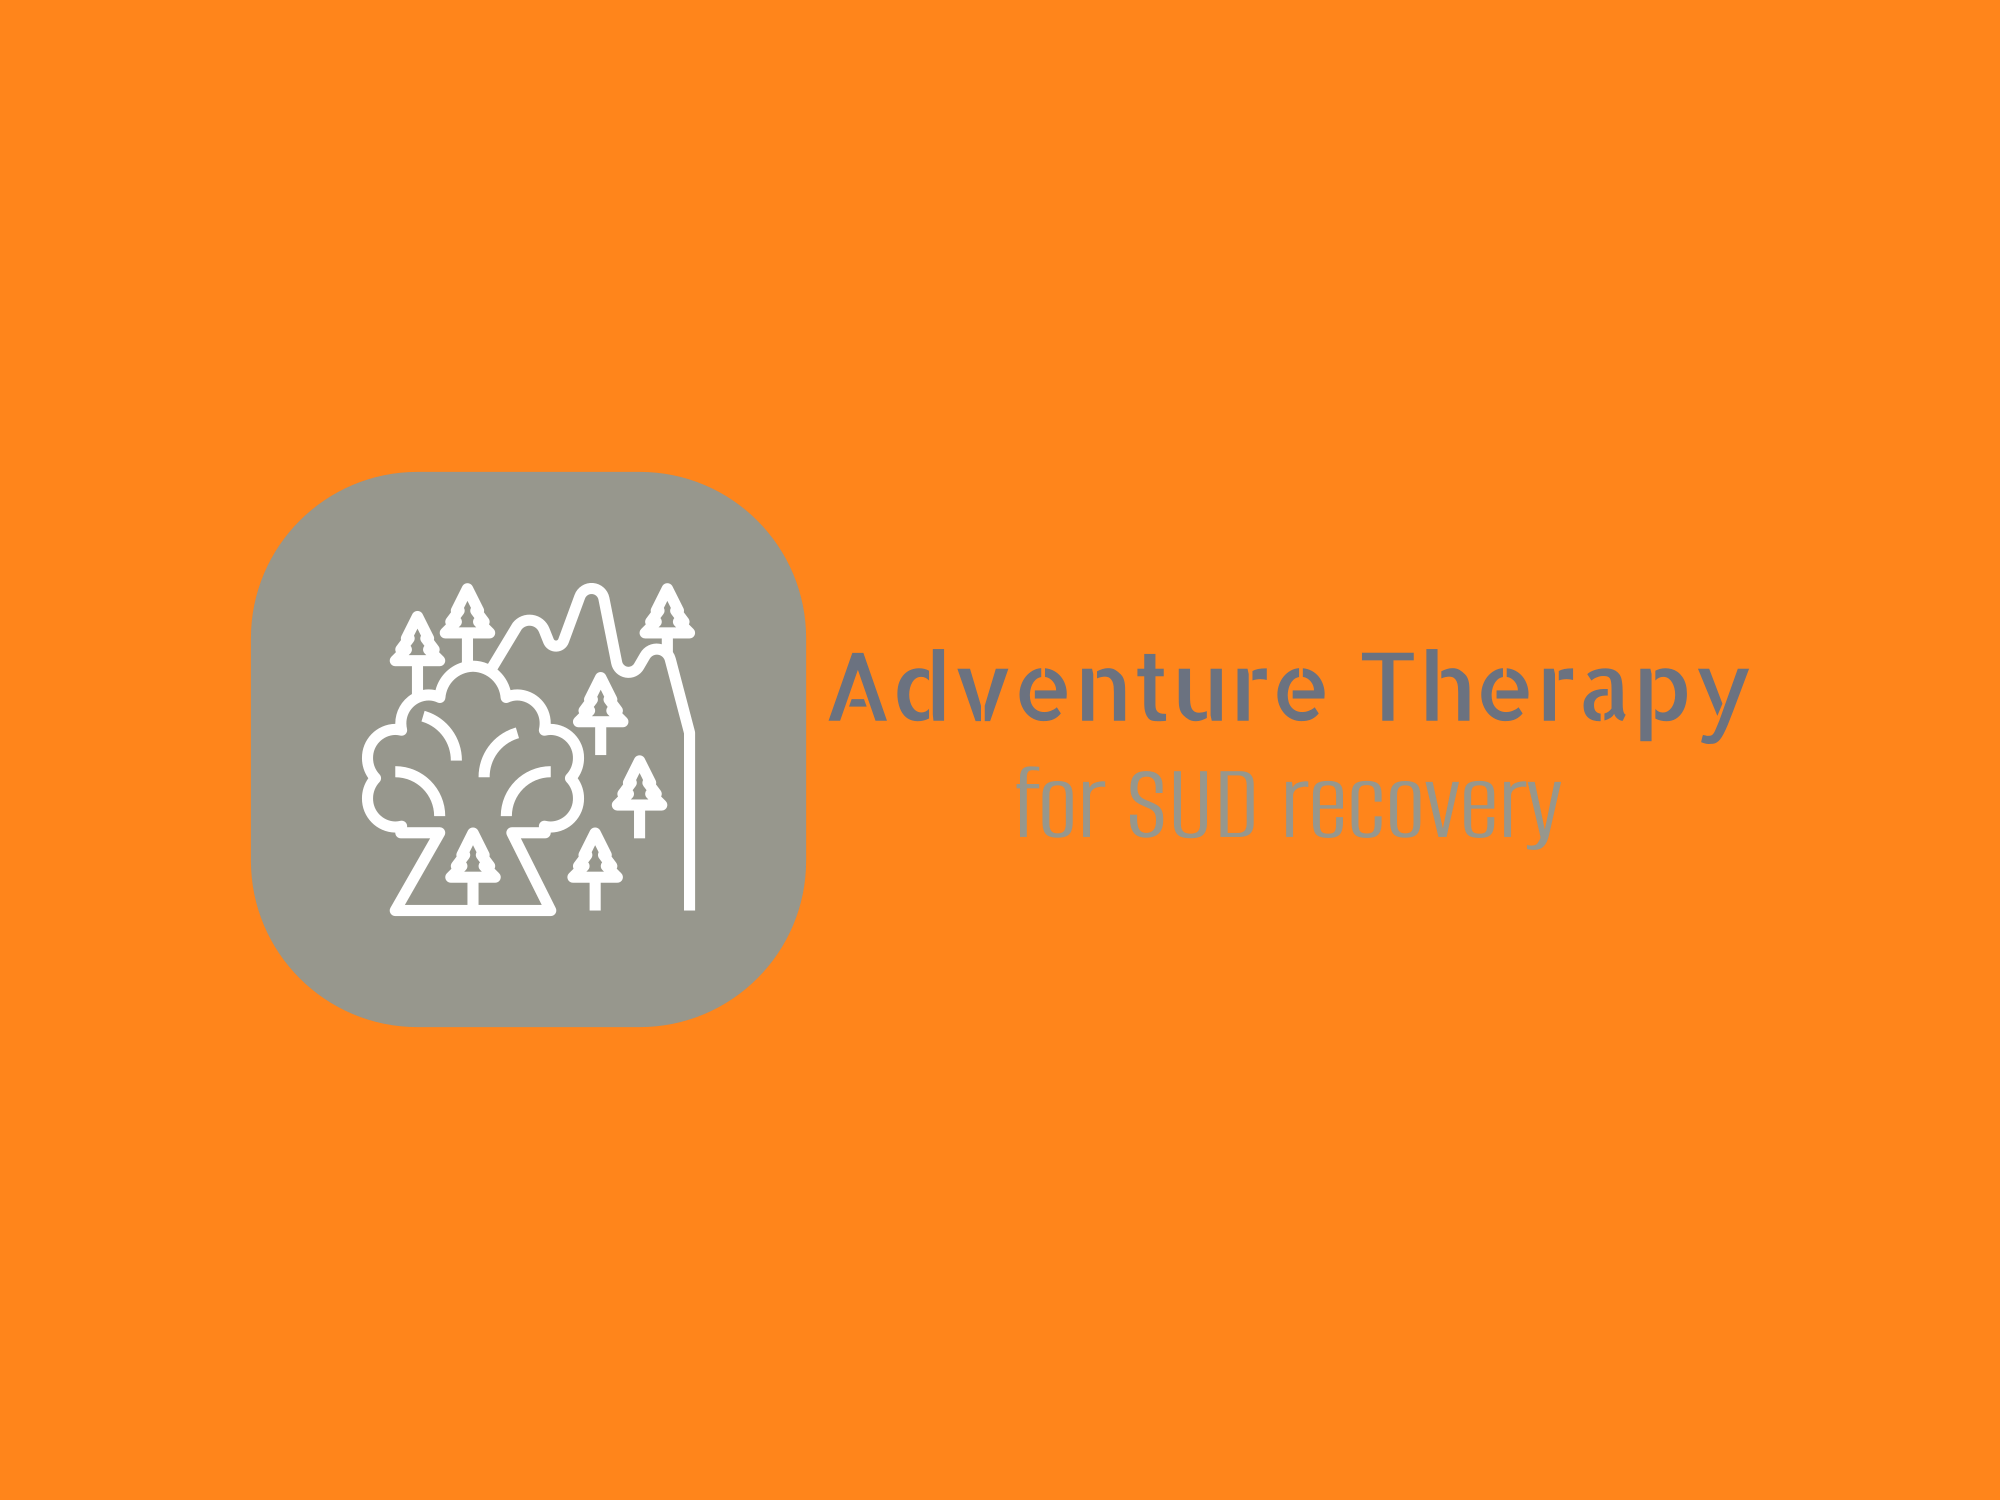 Adventure Therapy for SUD recovery (Under development)